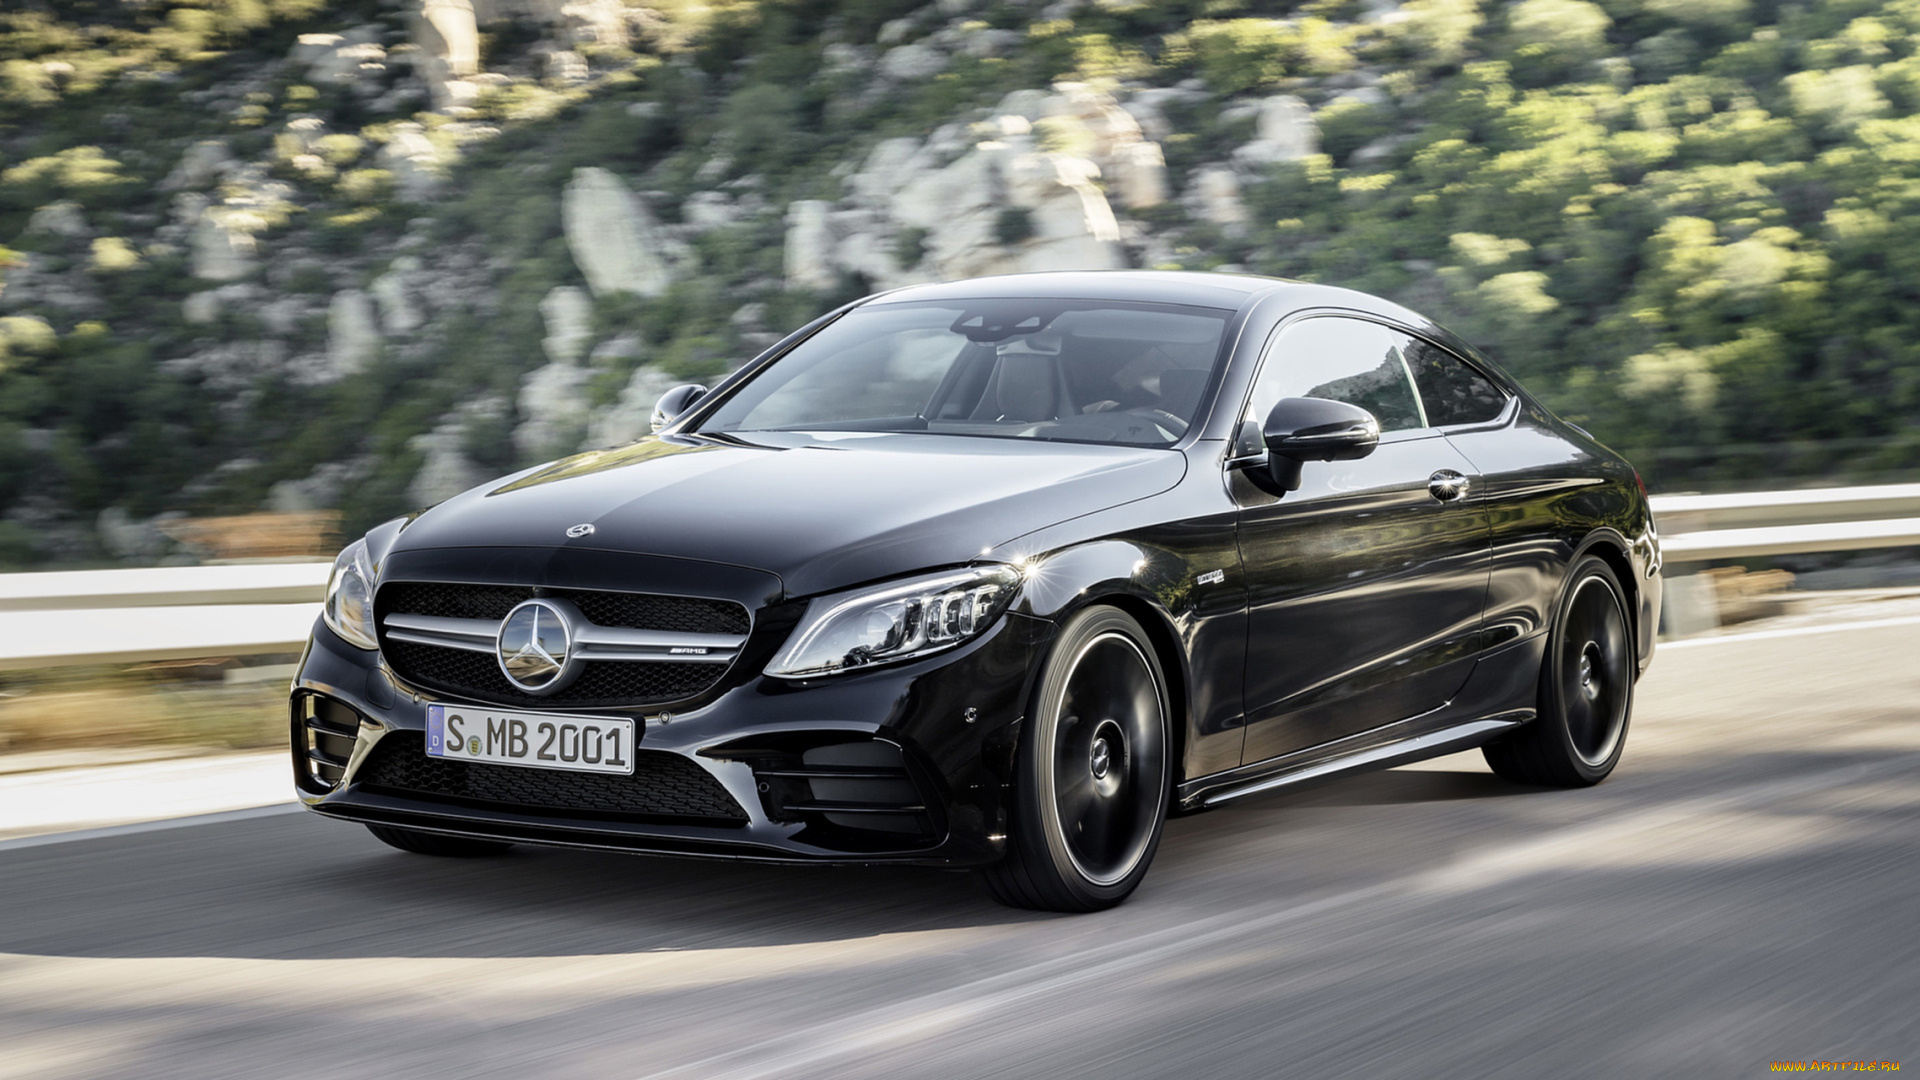 mercedes-benz, amg, c43, coupe, 4matic, night, package, 2019, автомобили, mercedes-benz, c43, coupe, 4matic, night, amg, carbon, package, 2019